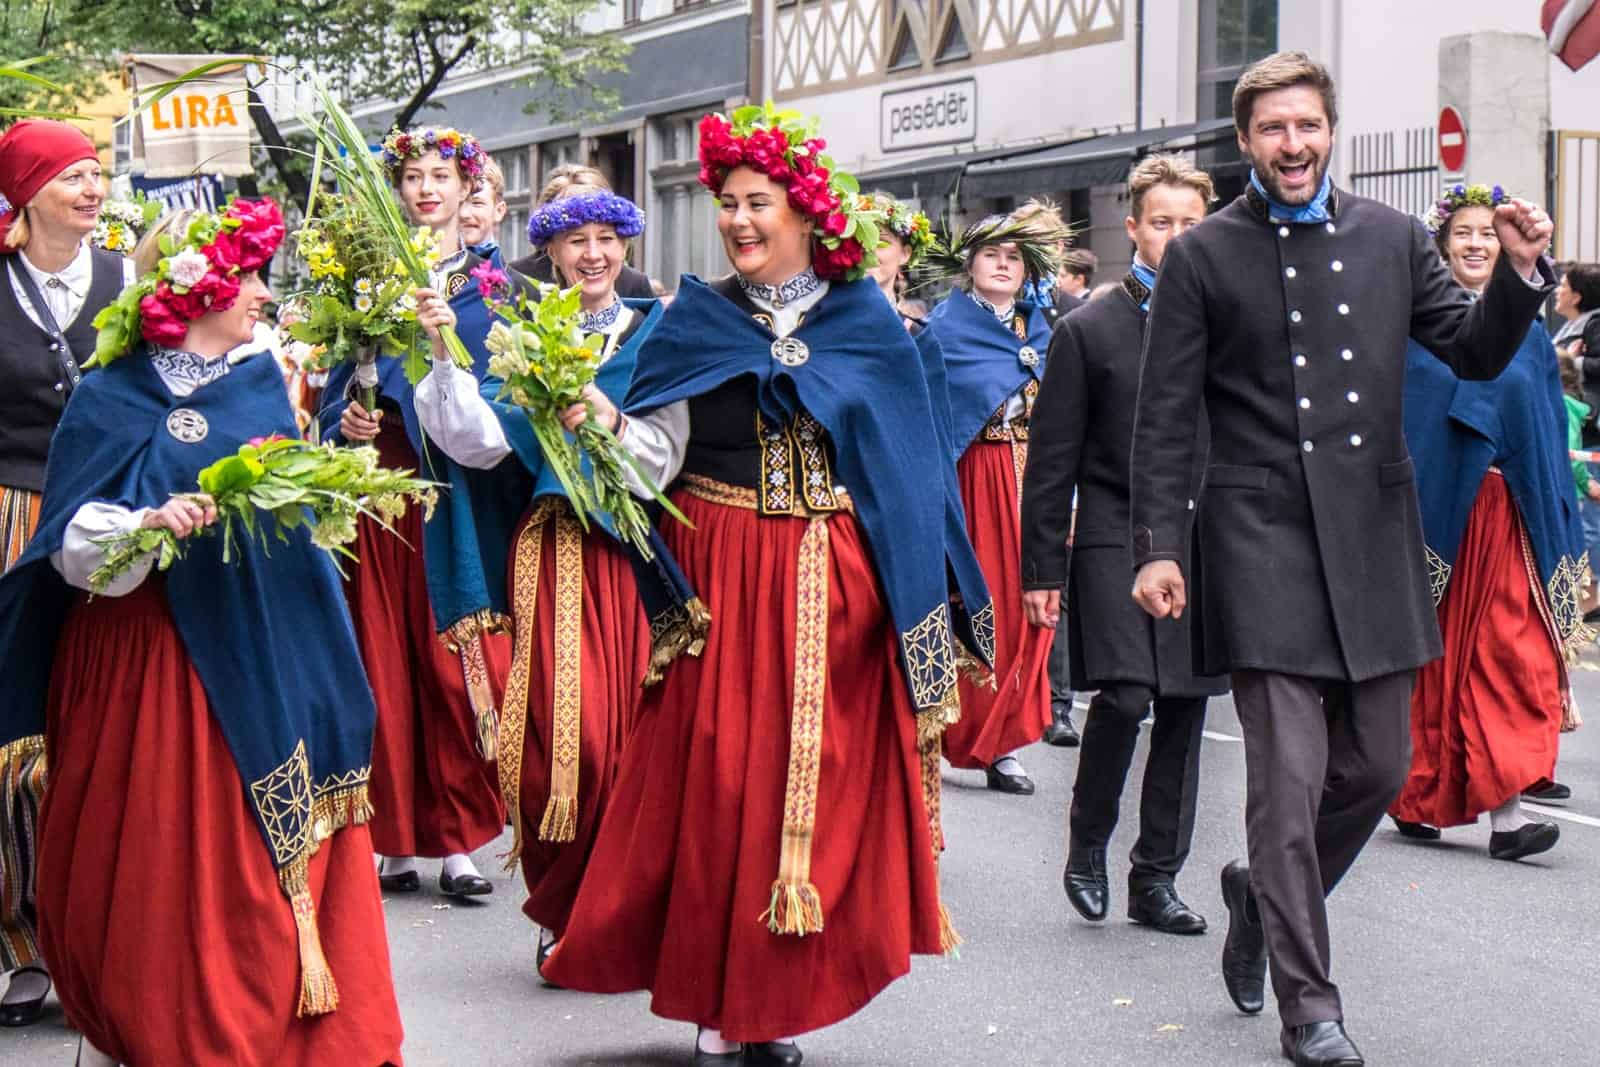 Latvians parading in the opening event of the Song and Dance Celebration in Riga, Latvia